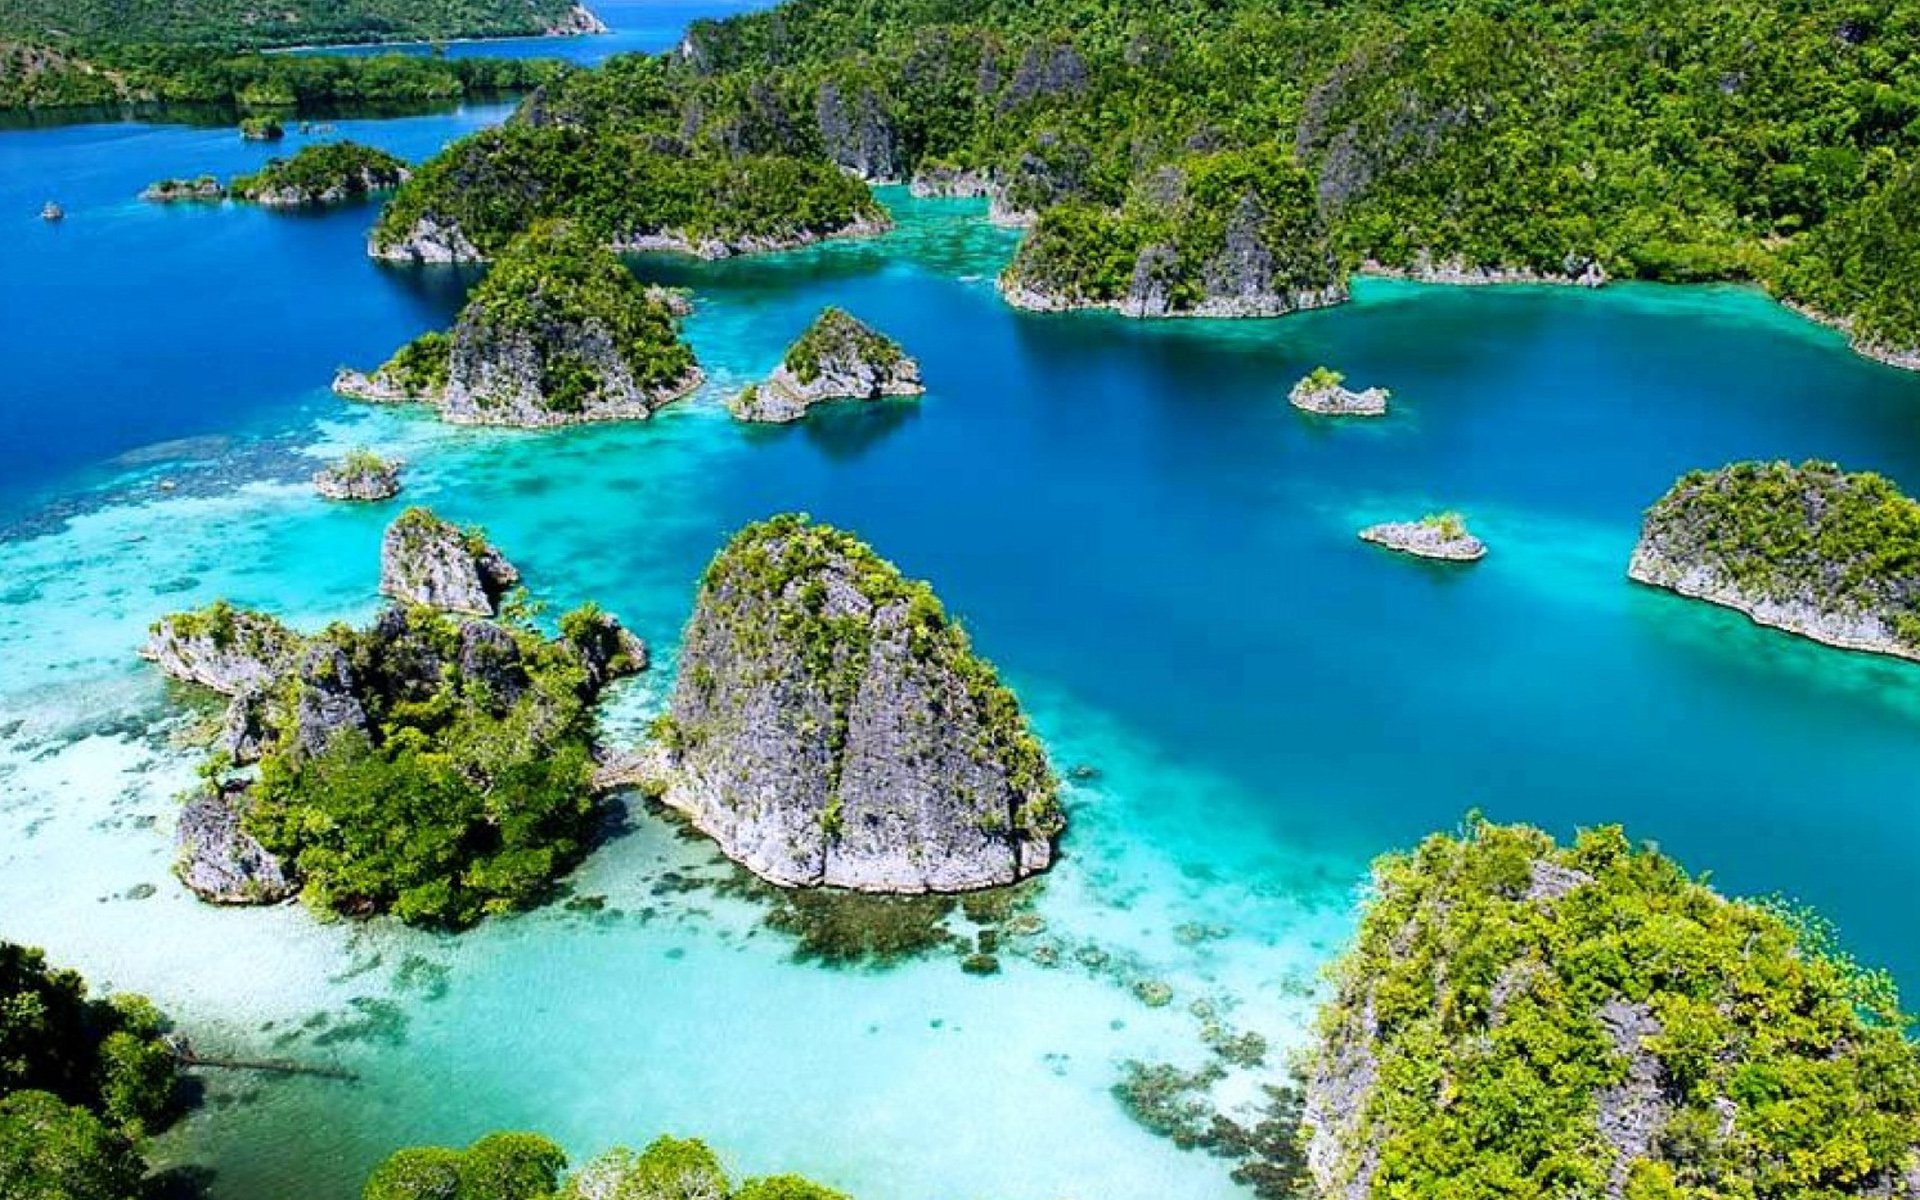 Raja Ampat, Indonesia Tropical Islands With Green Vegetation, Forest